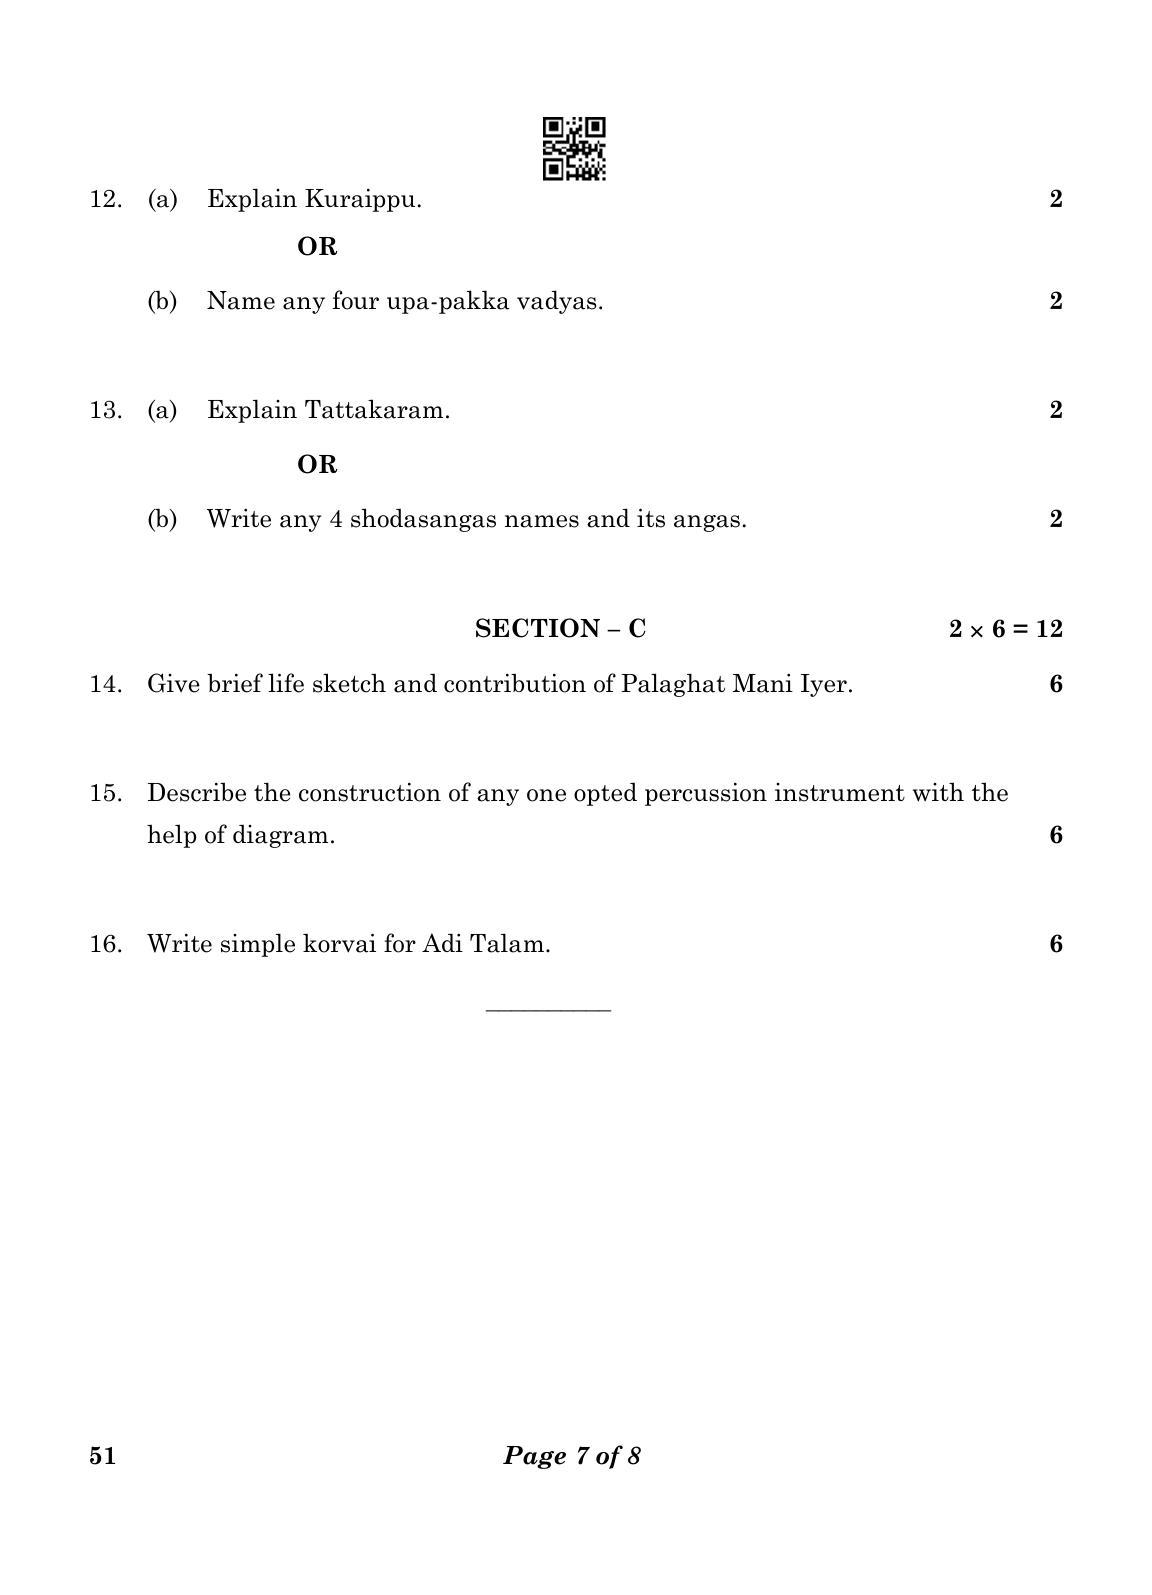 CBSE Class 10 51 CARNATIC MUSIC (Percussion Instruments) 2023 Question Paper - Page 7